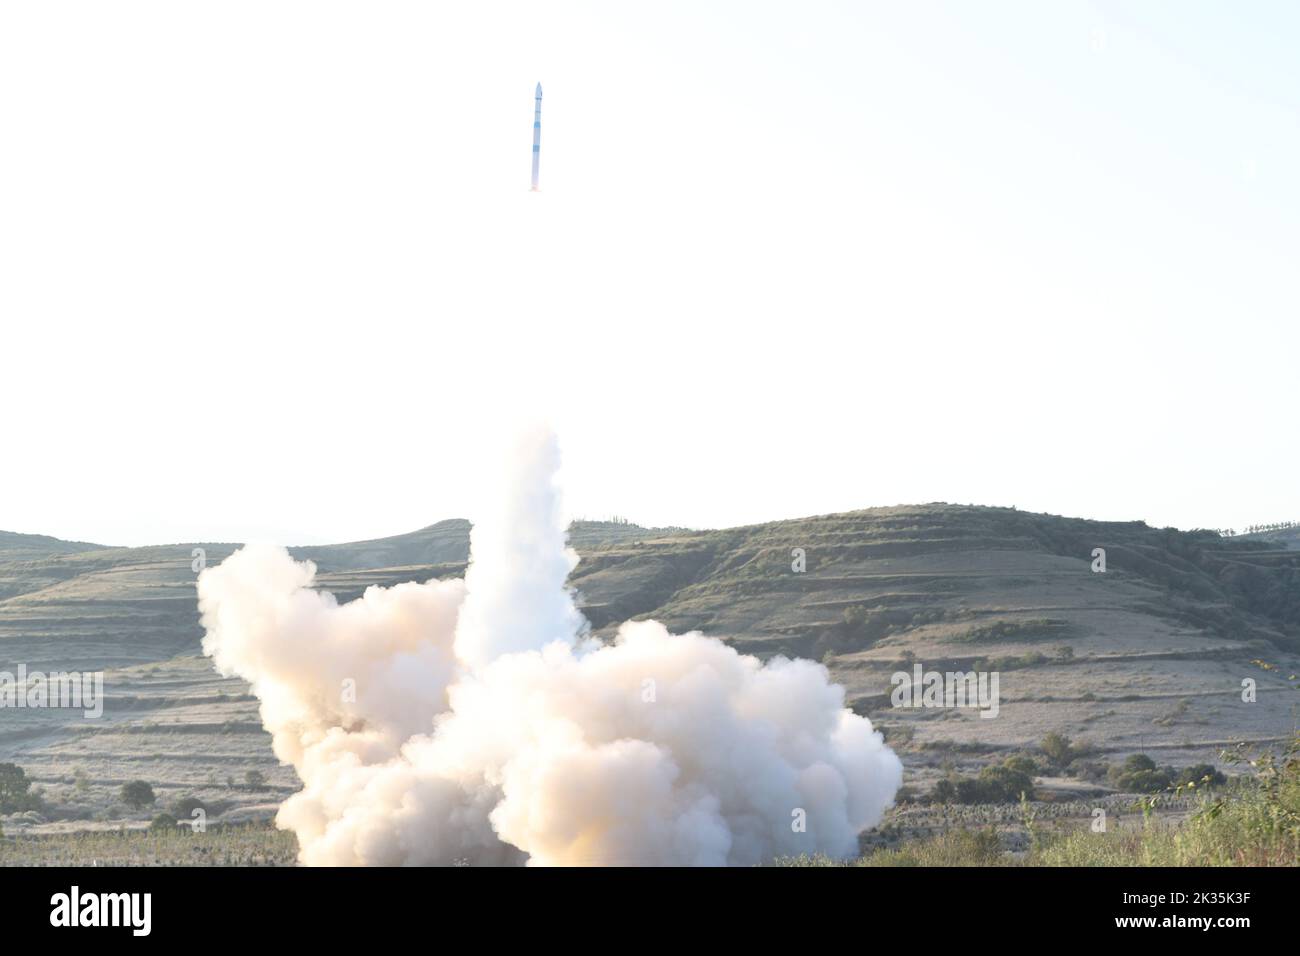 Taiyuan. 25th Sep, 2022. A Kuaizhou-1A carrier rocket carrying two satellites blasts off from the Taiyuan Satellite Launch Center in north China Sept. 25, 2022. The pair of satellites, Shiyan-14 and Shiyan-15, were lifted at 6:55 a.m. (2255 GMT Saturday) from the Taiyuan Satellite Launch Center and entered the preset orbit. Credit: Zheng Bin/Xinhua/Alamy Live News Stock Photo